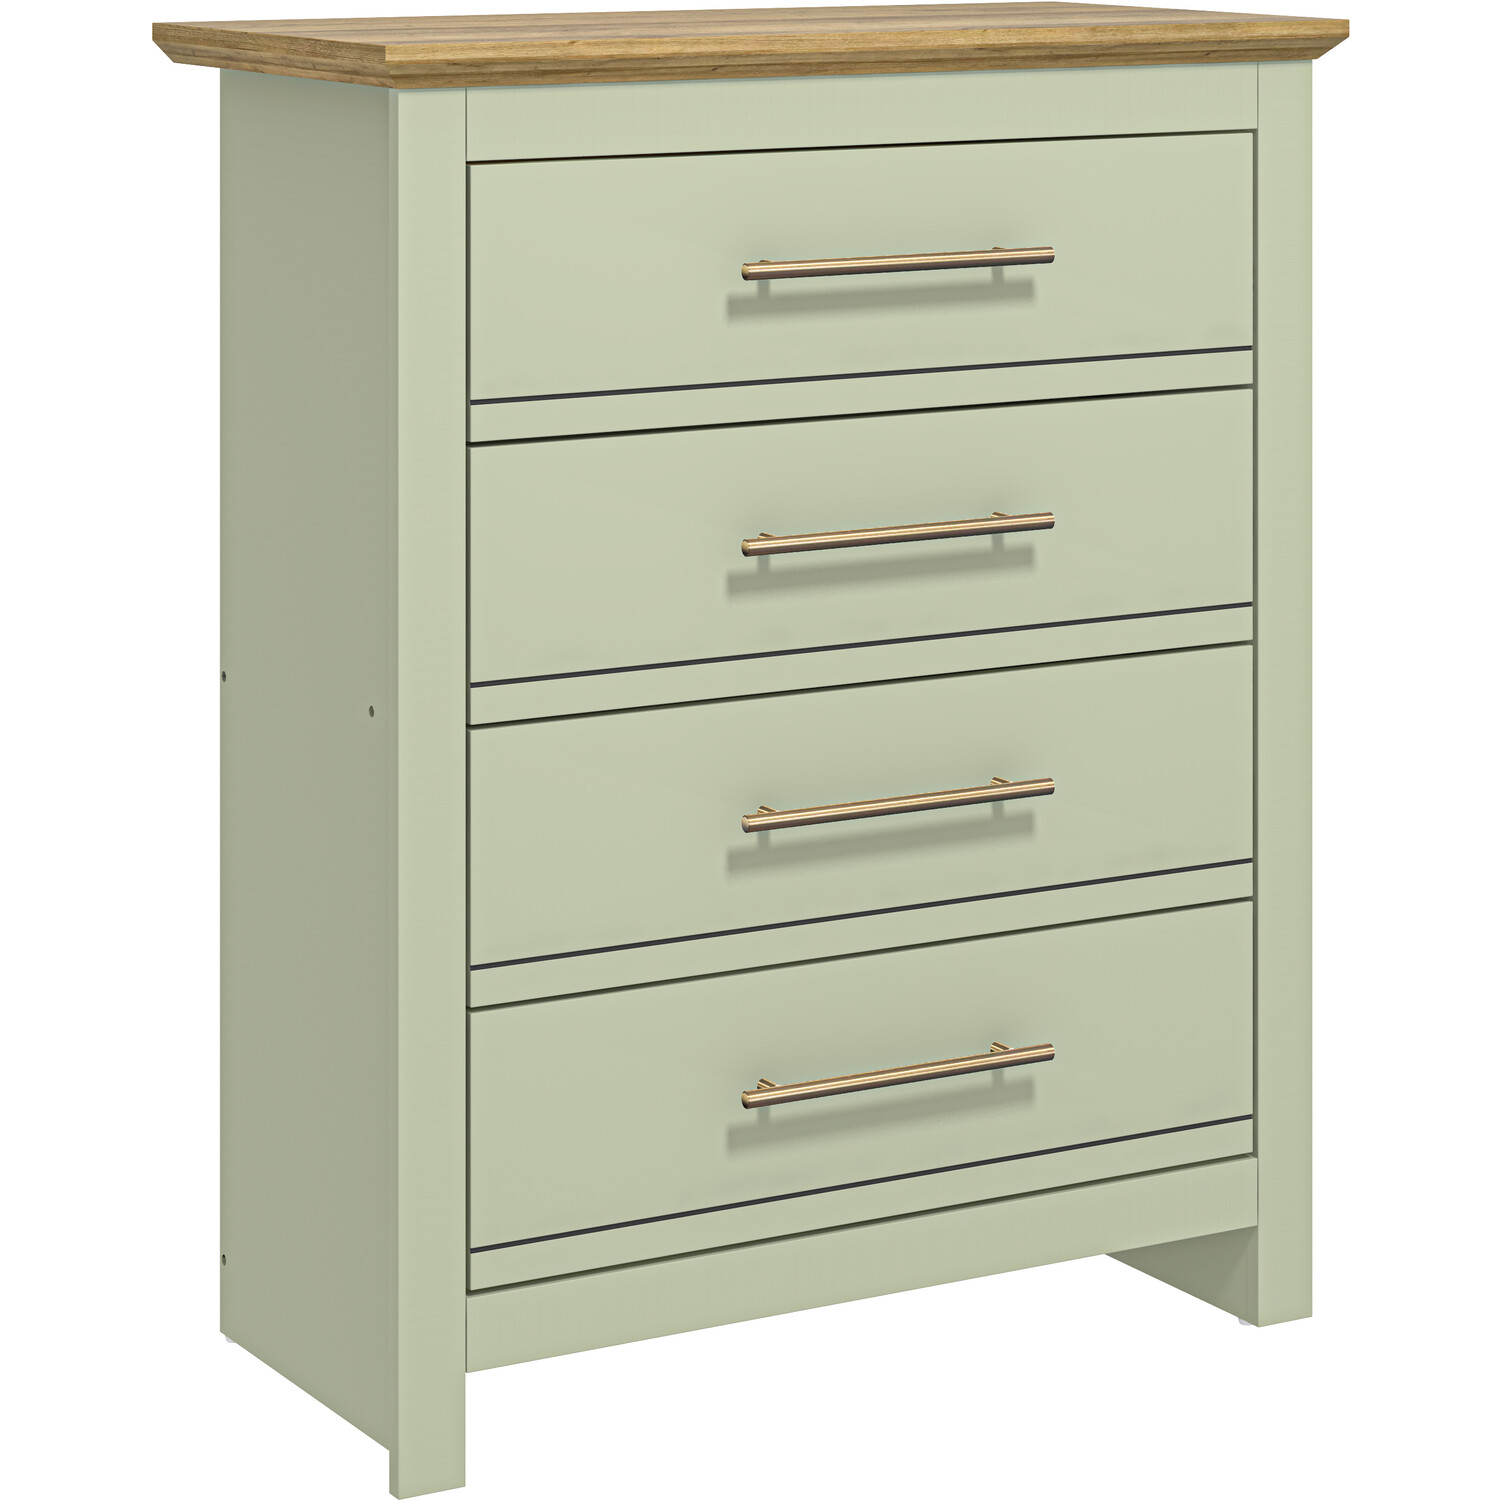 Bexley 4 Drawer Sage Green Chest of Drawers Image 3